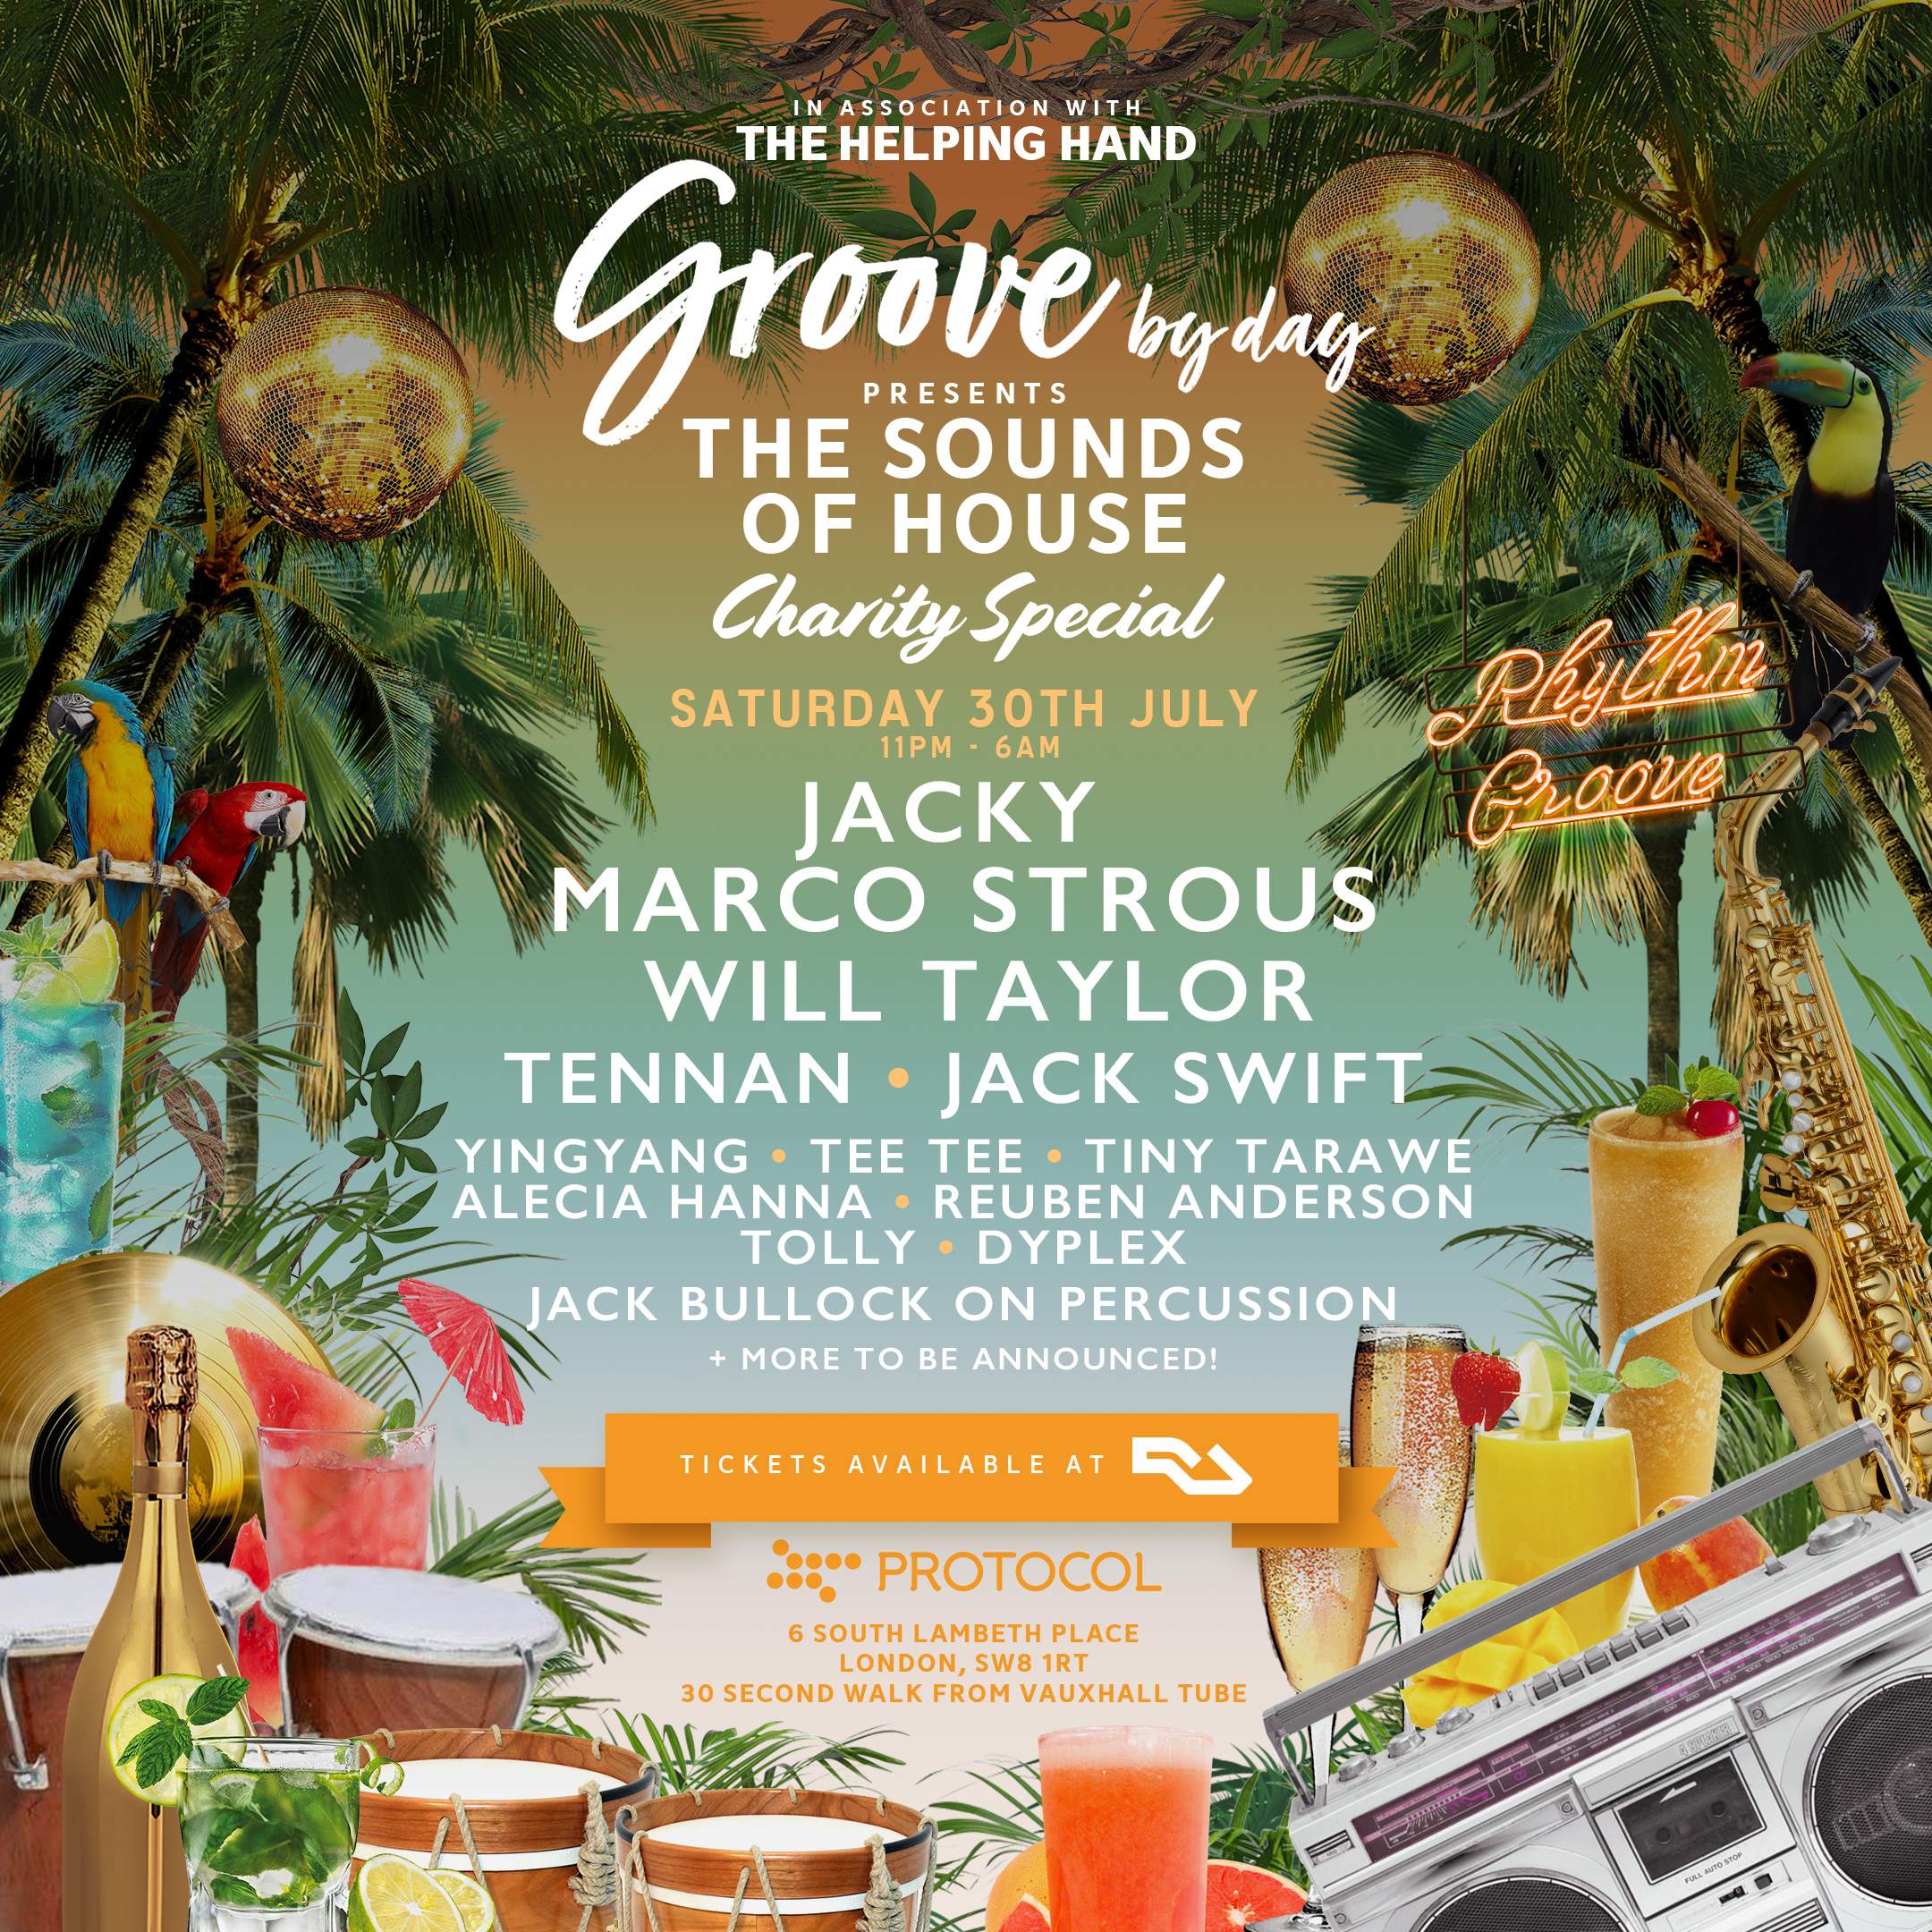 Groove By Night - JACKY, Marco Strous, Will Taylor + more  - Página frontal